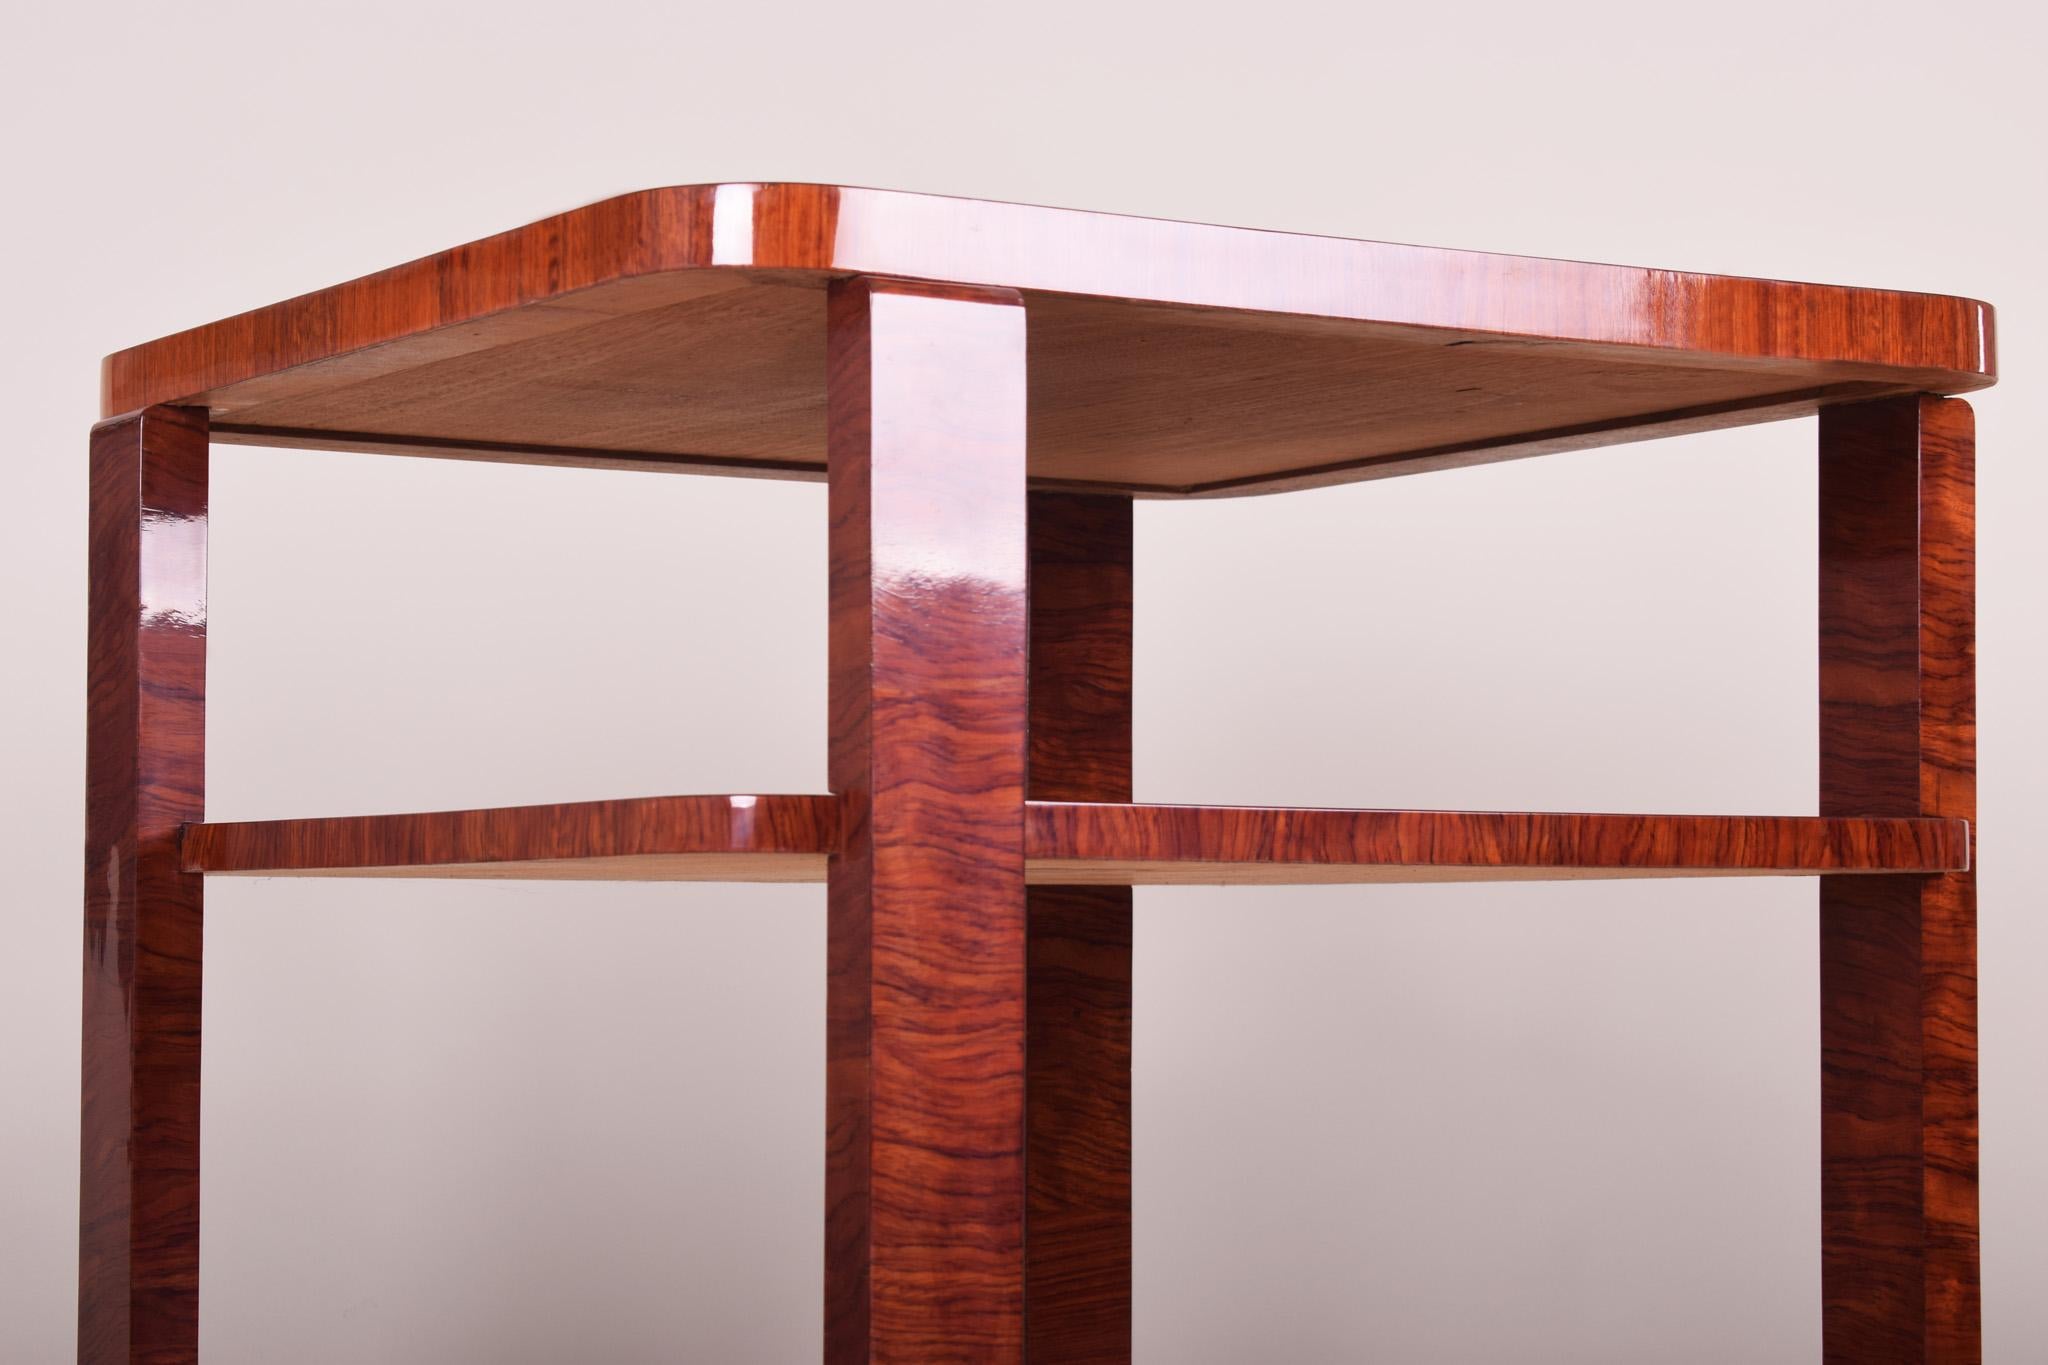 Wood Art Deco Coffee Table, Made Out of Palisandr, Czechia, 1920s, Fully Restored For Sale